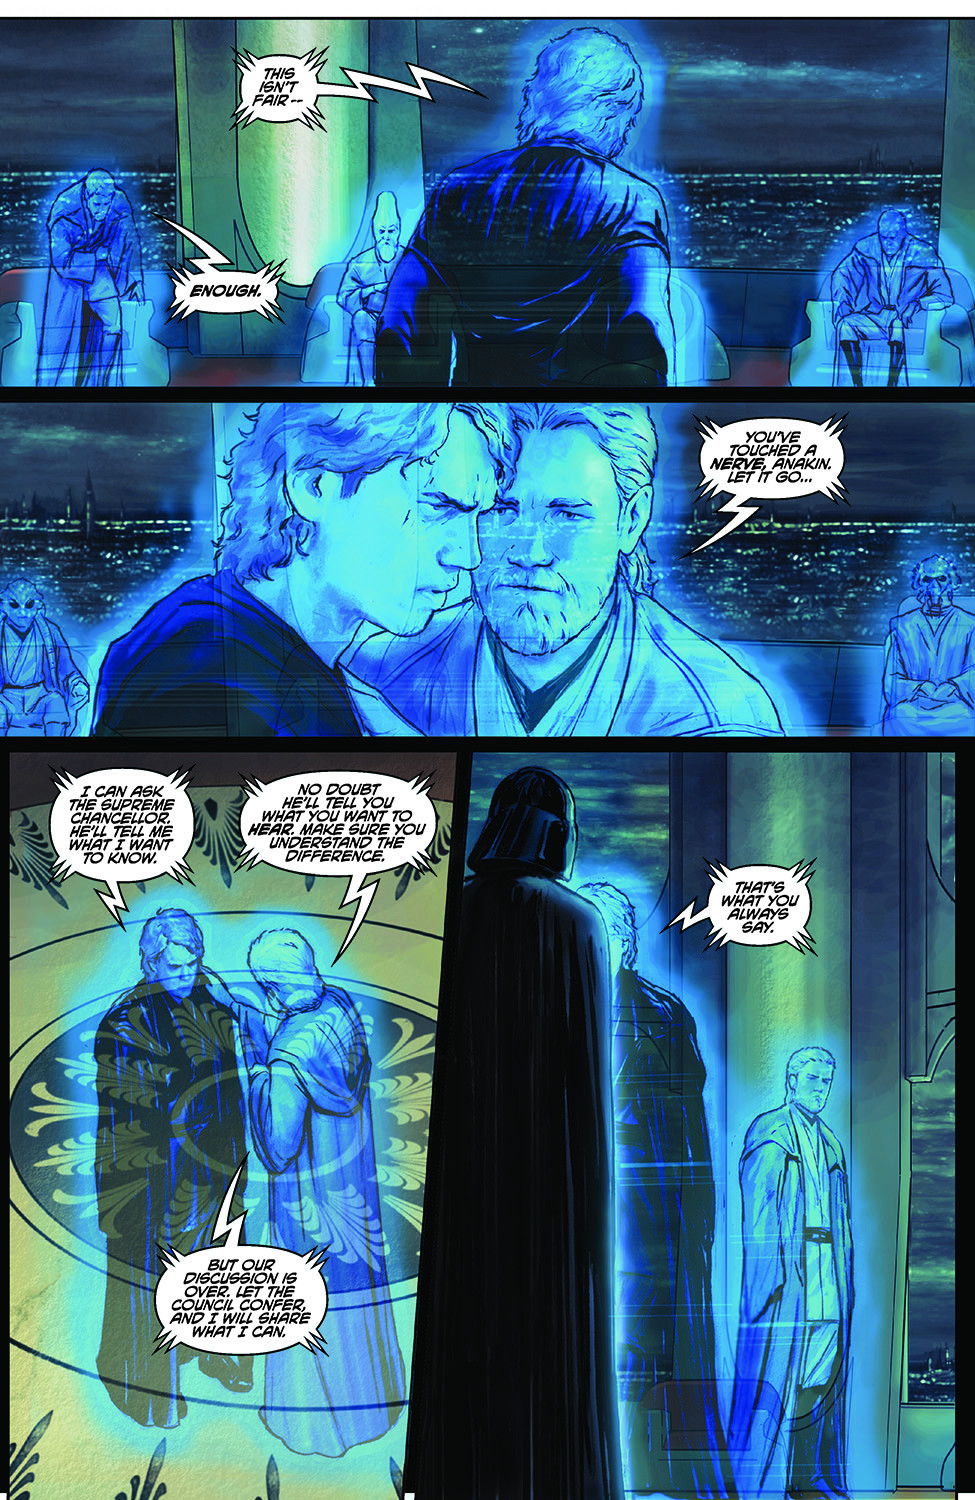 Star Wars Darth Vader And The Ghost Prison Issue 3 | Read Star Wars Darth  Vader And The Ghost Prison Issue 3 comic online in high quality. Read Full  Comic online for